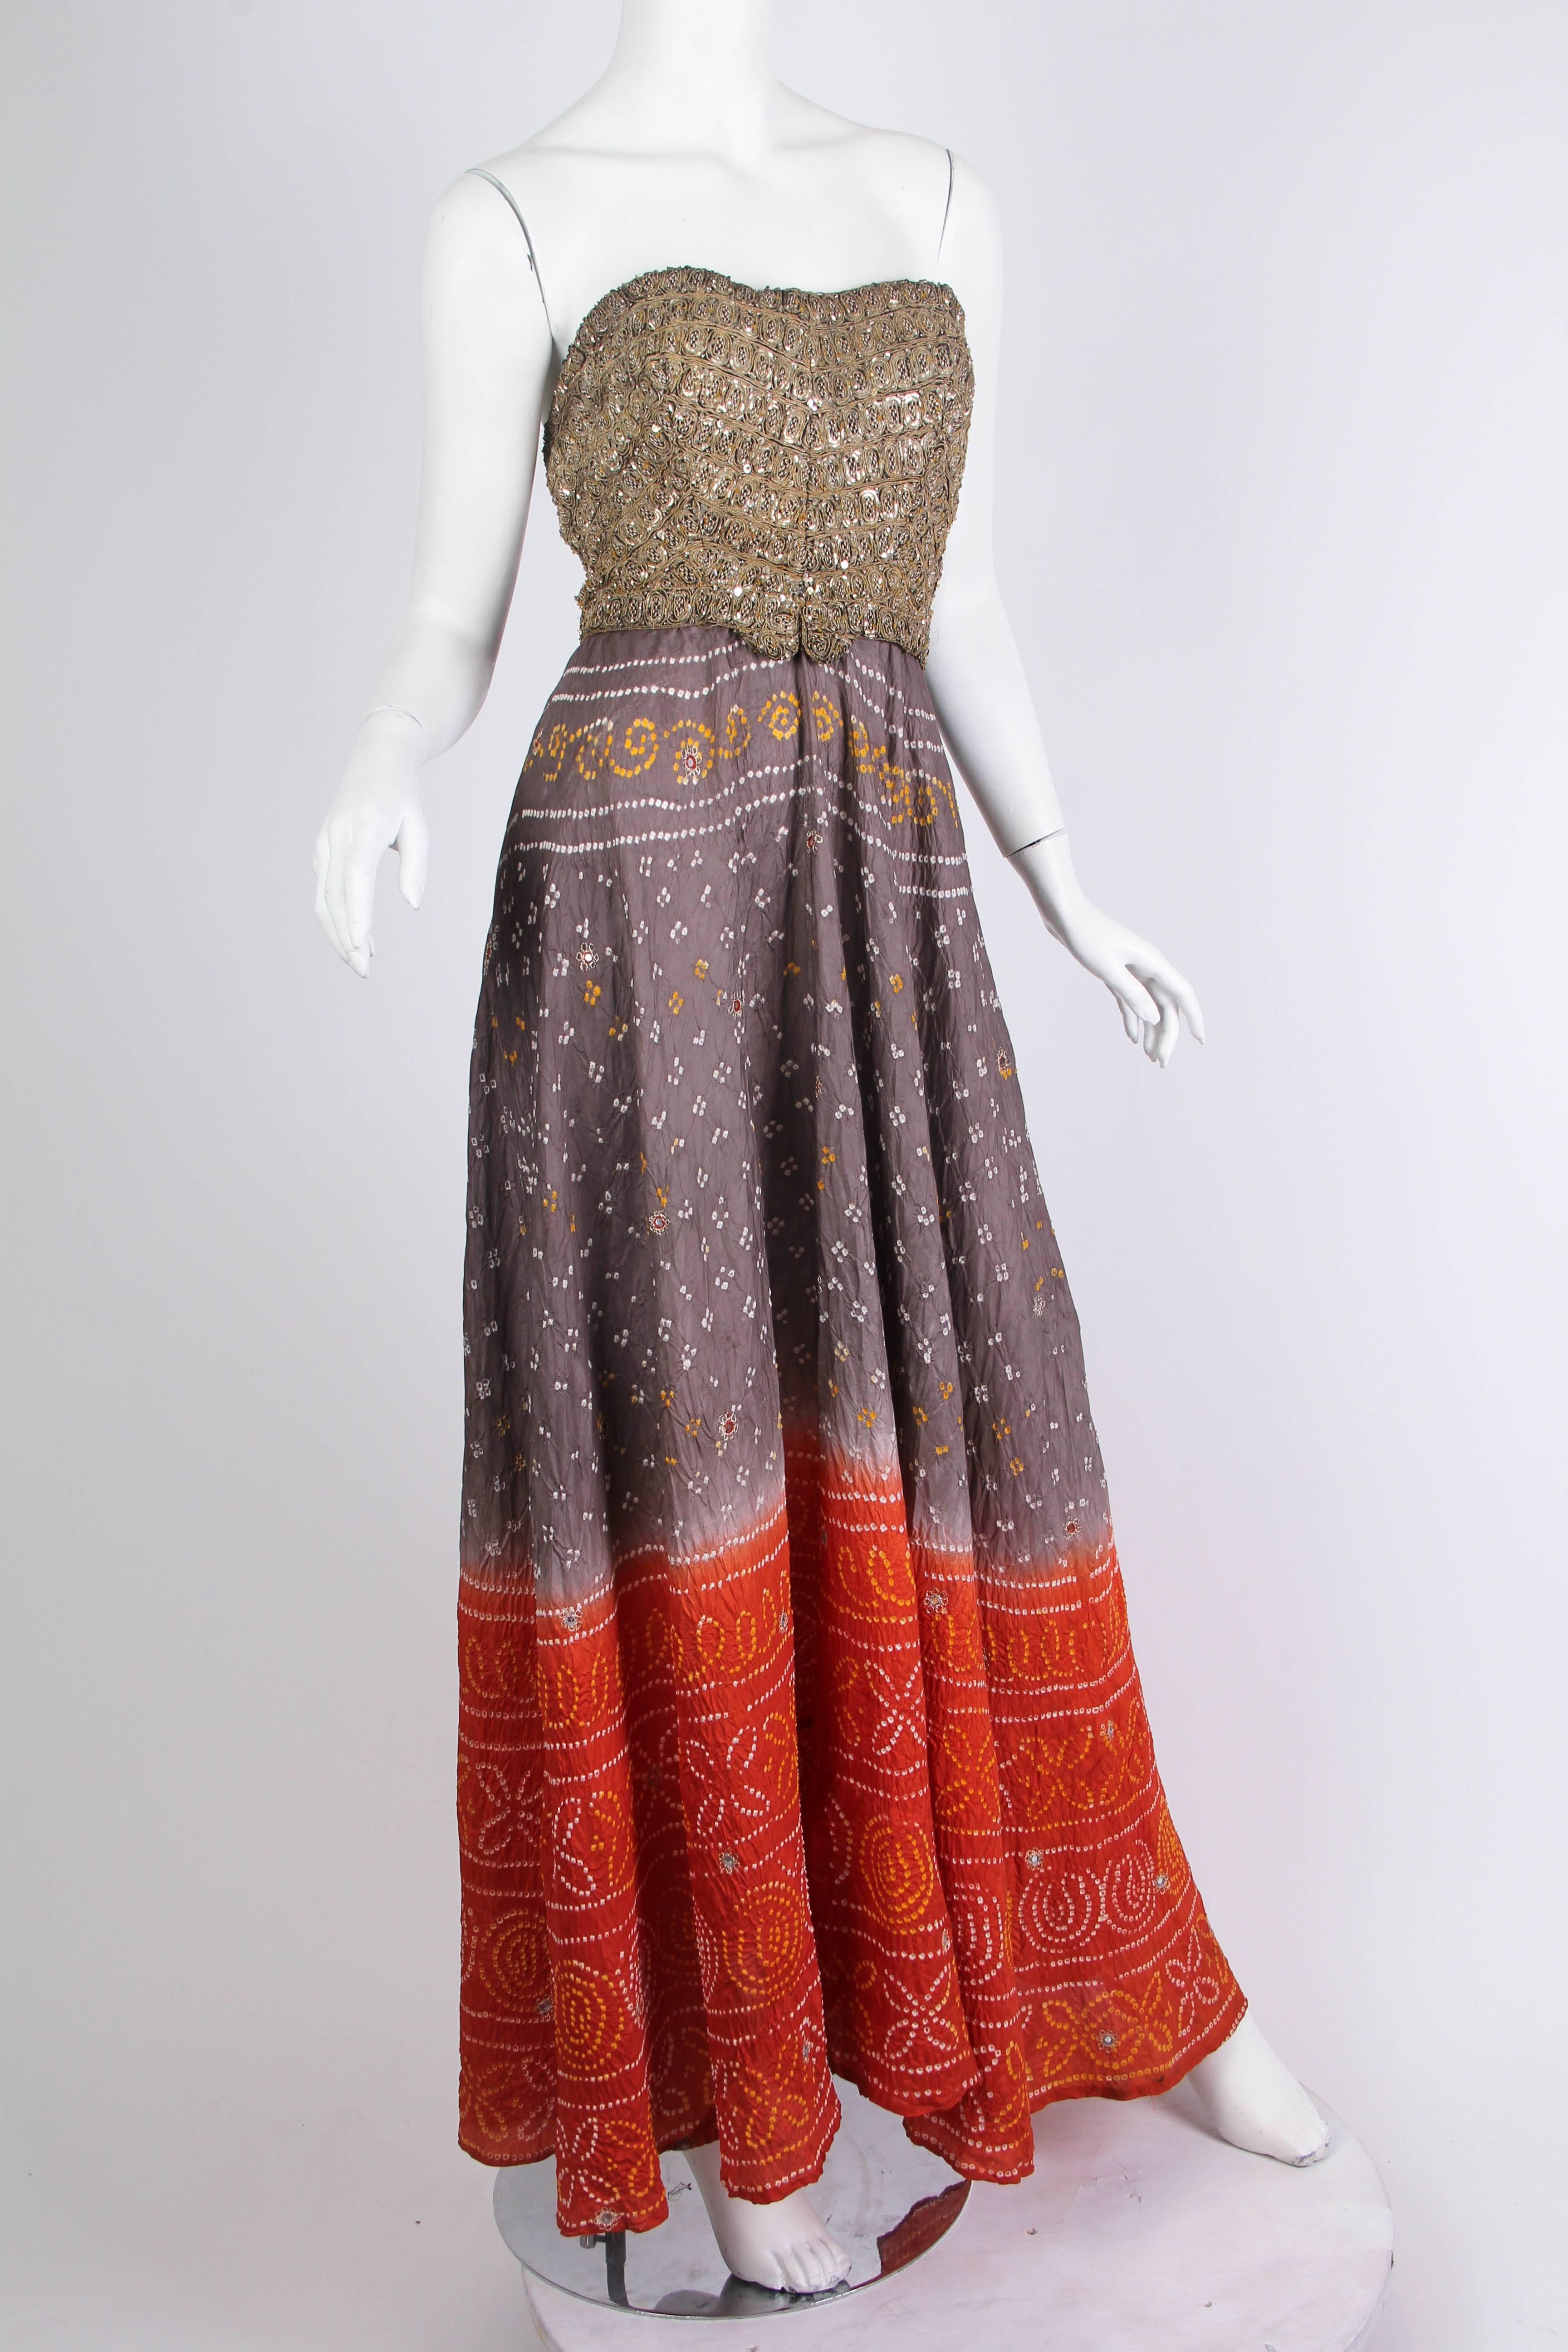 MORPHEW COLLECTION Hand Dyed Shibori Silk & Metalilc Gold Indian Embroidered Strapless Gown
MORPHEW COLLECTION is made entirely by hand in our NYC Ateliér of rare antique materials sourced from around the globe. Our sustainable vintage materials